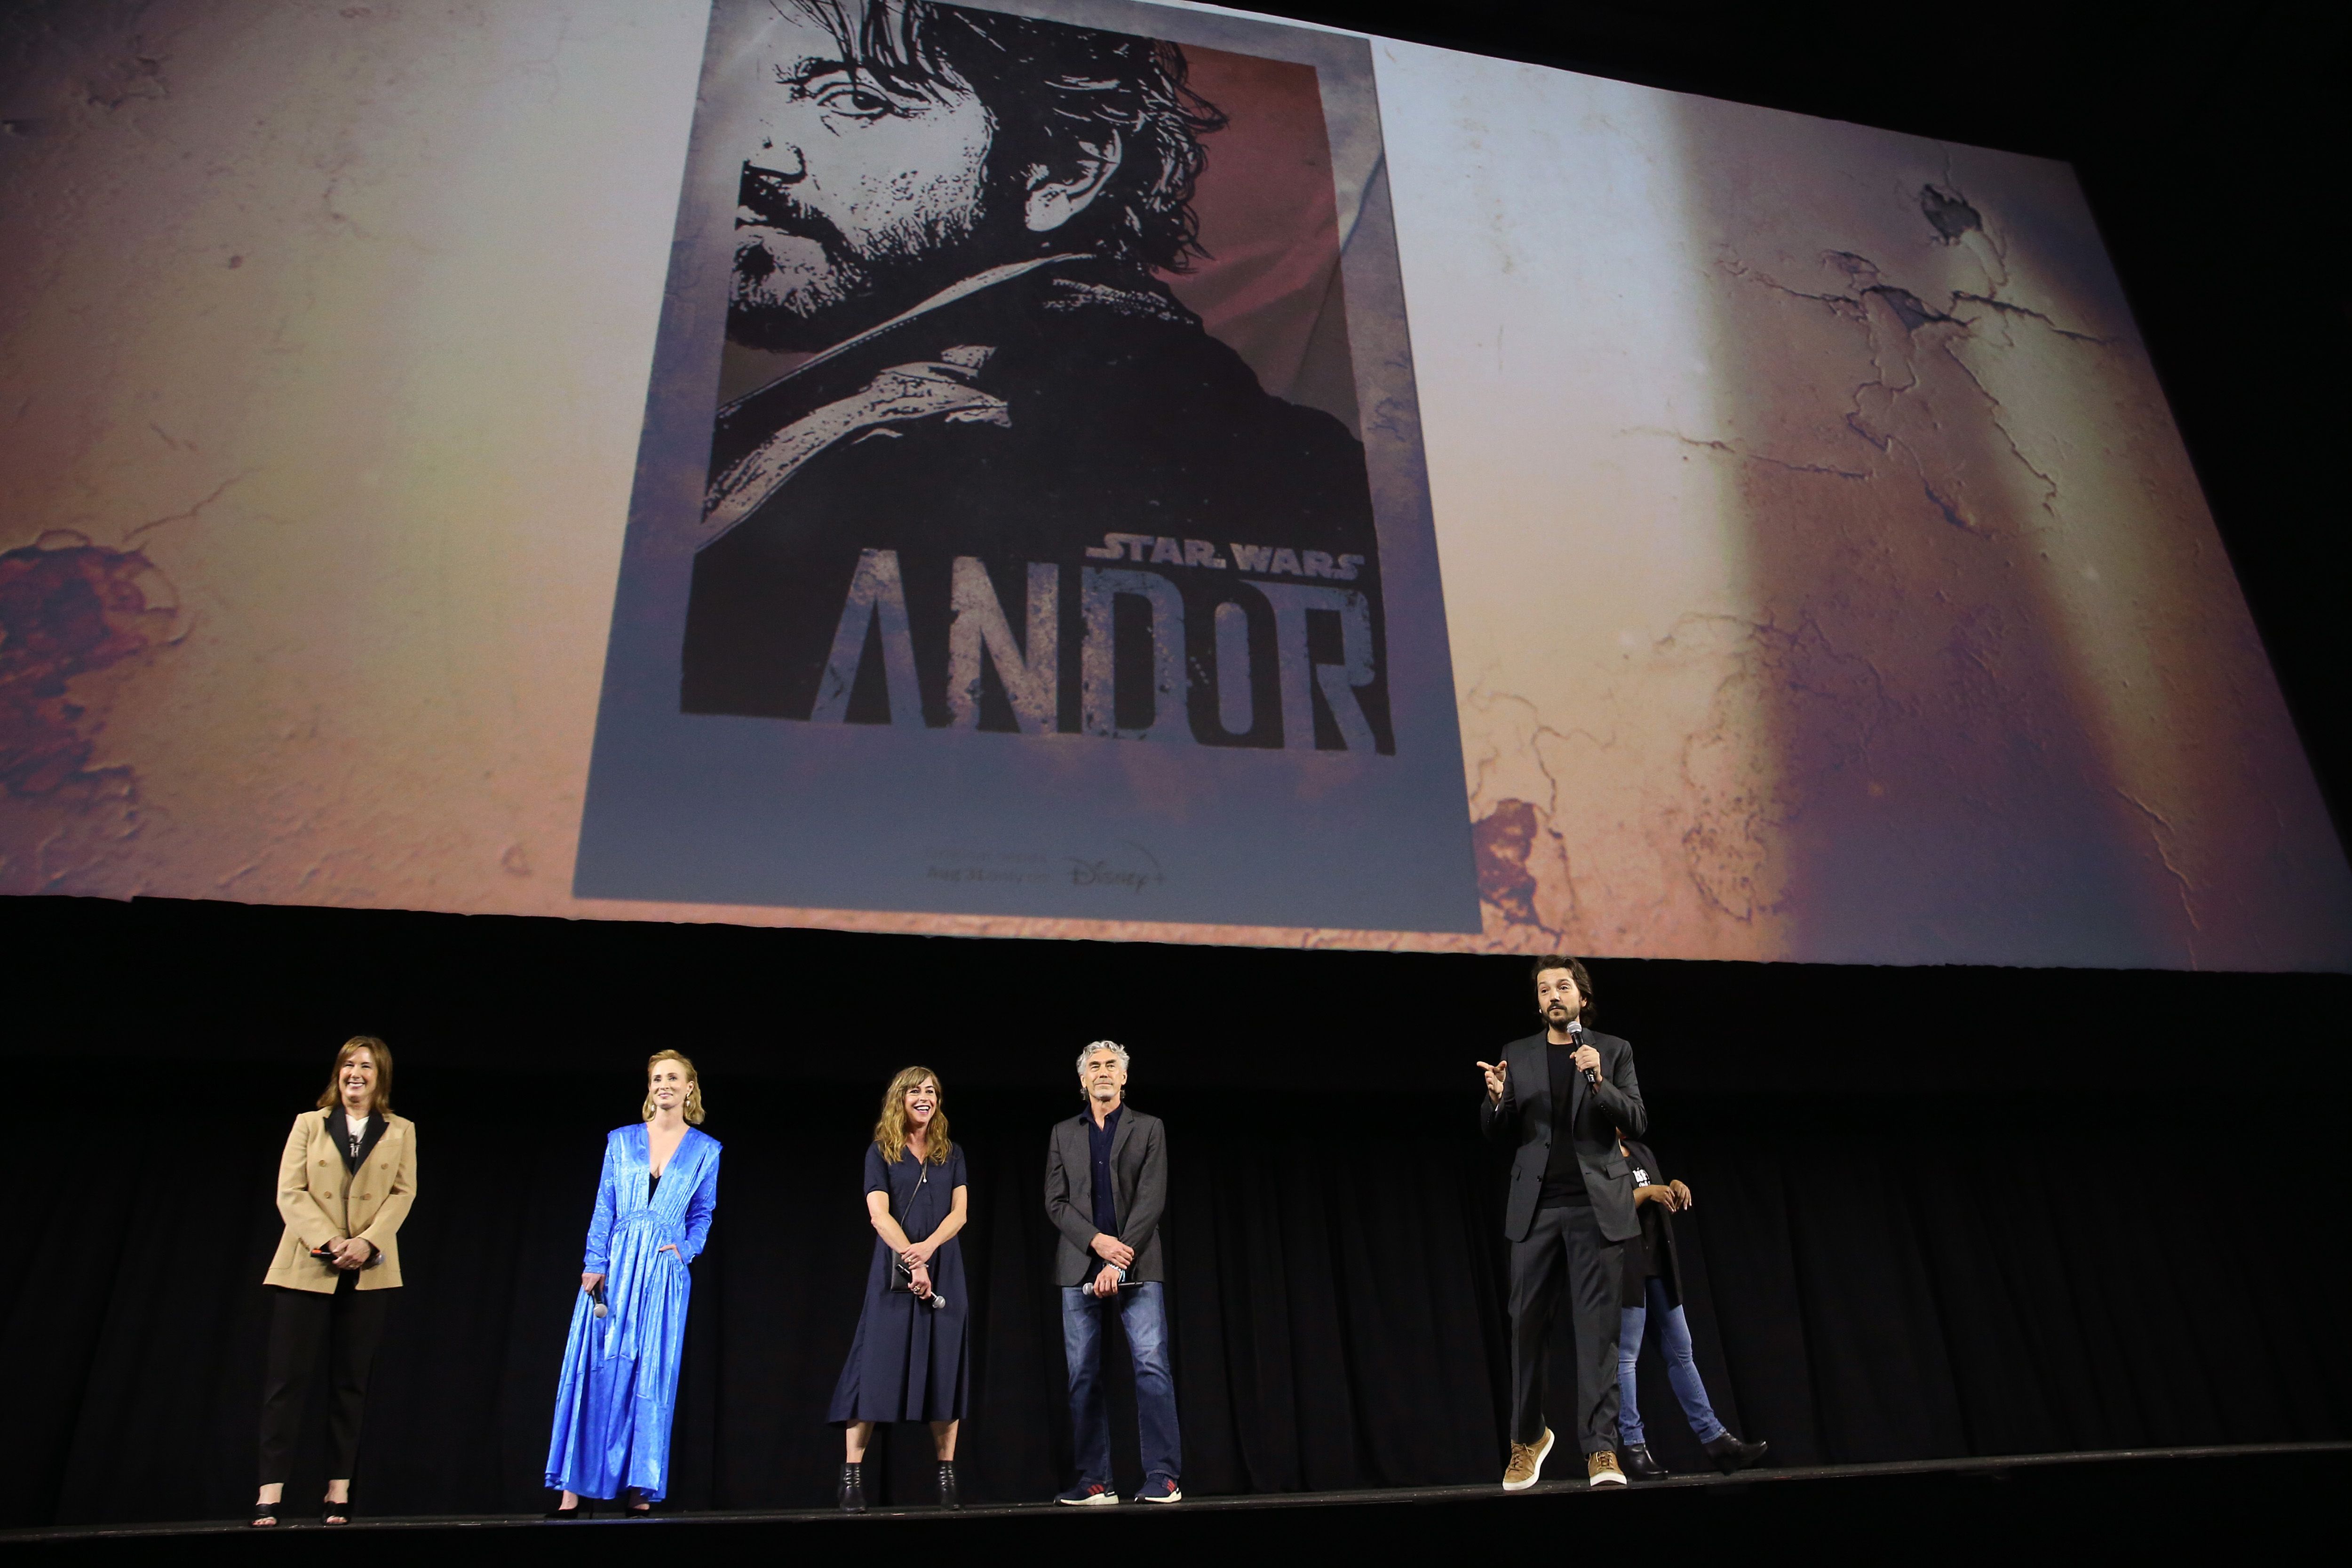 Producers and actors from the 'Star Wars' TV series 'Andor' speak on stage under a promotional image for the show.